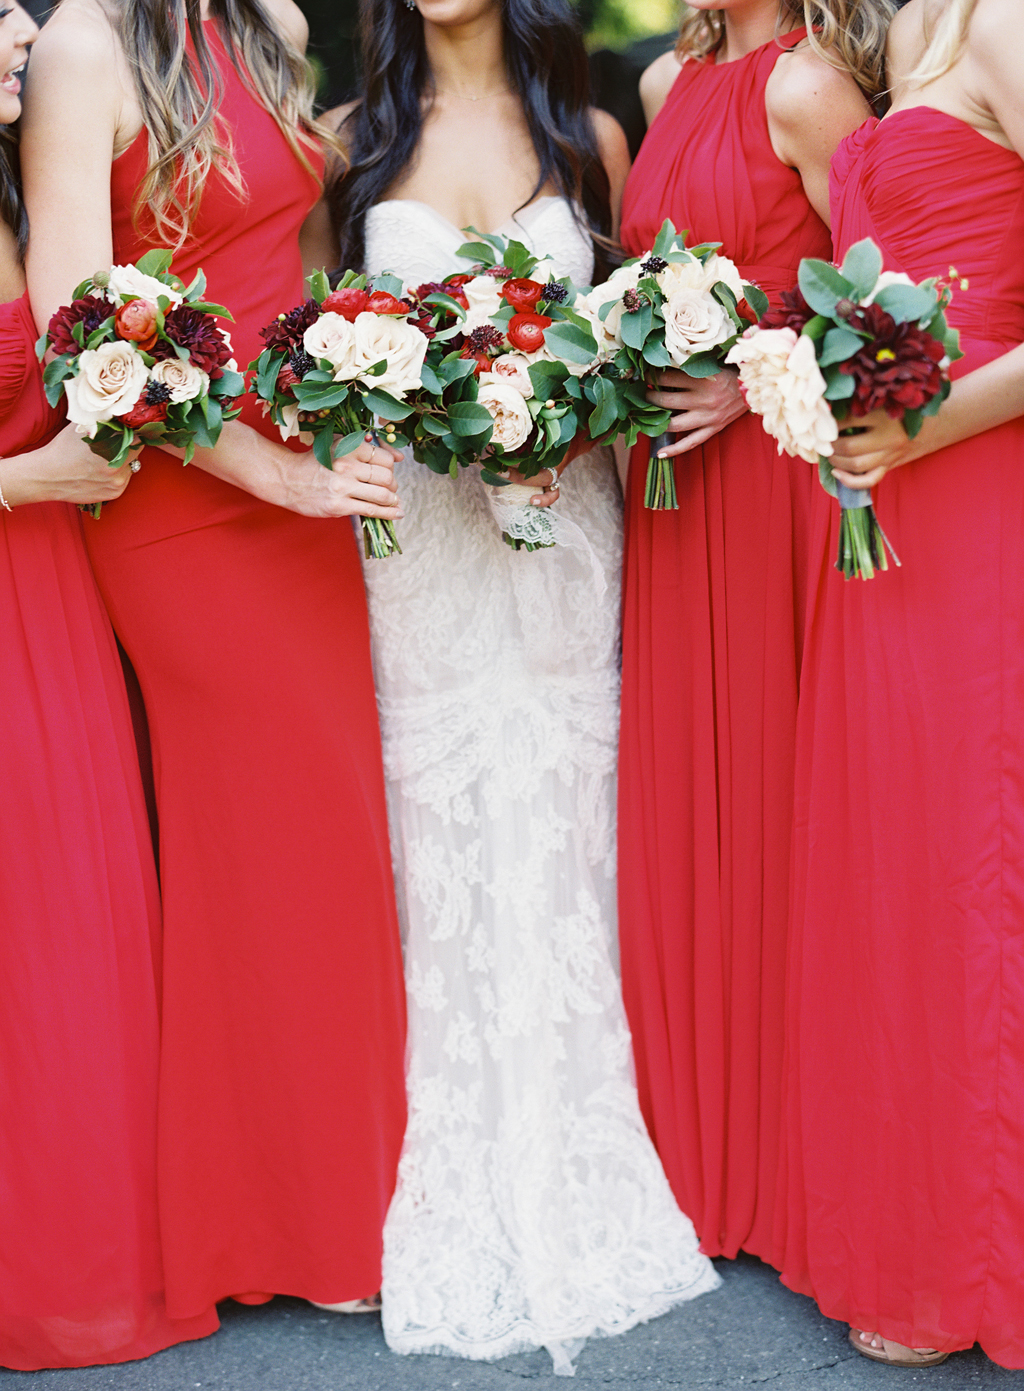 A film photograph of a bride and her bridesmaids at a wedding in Napa Valley.